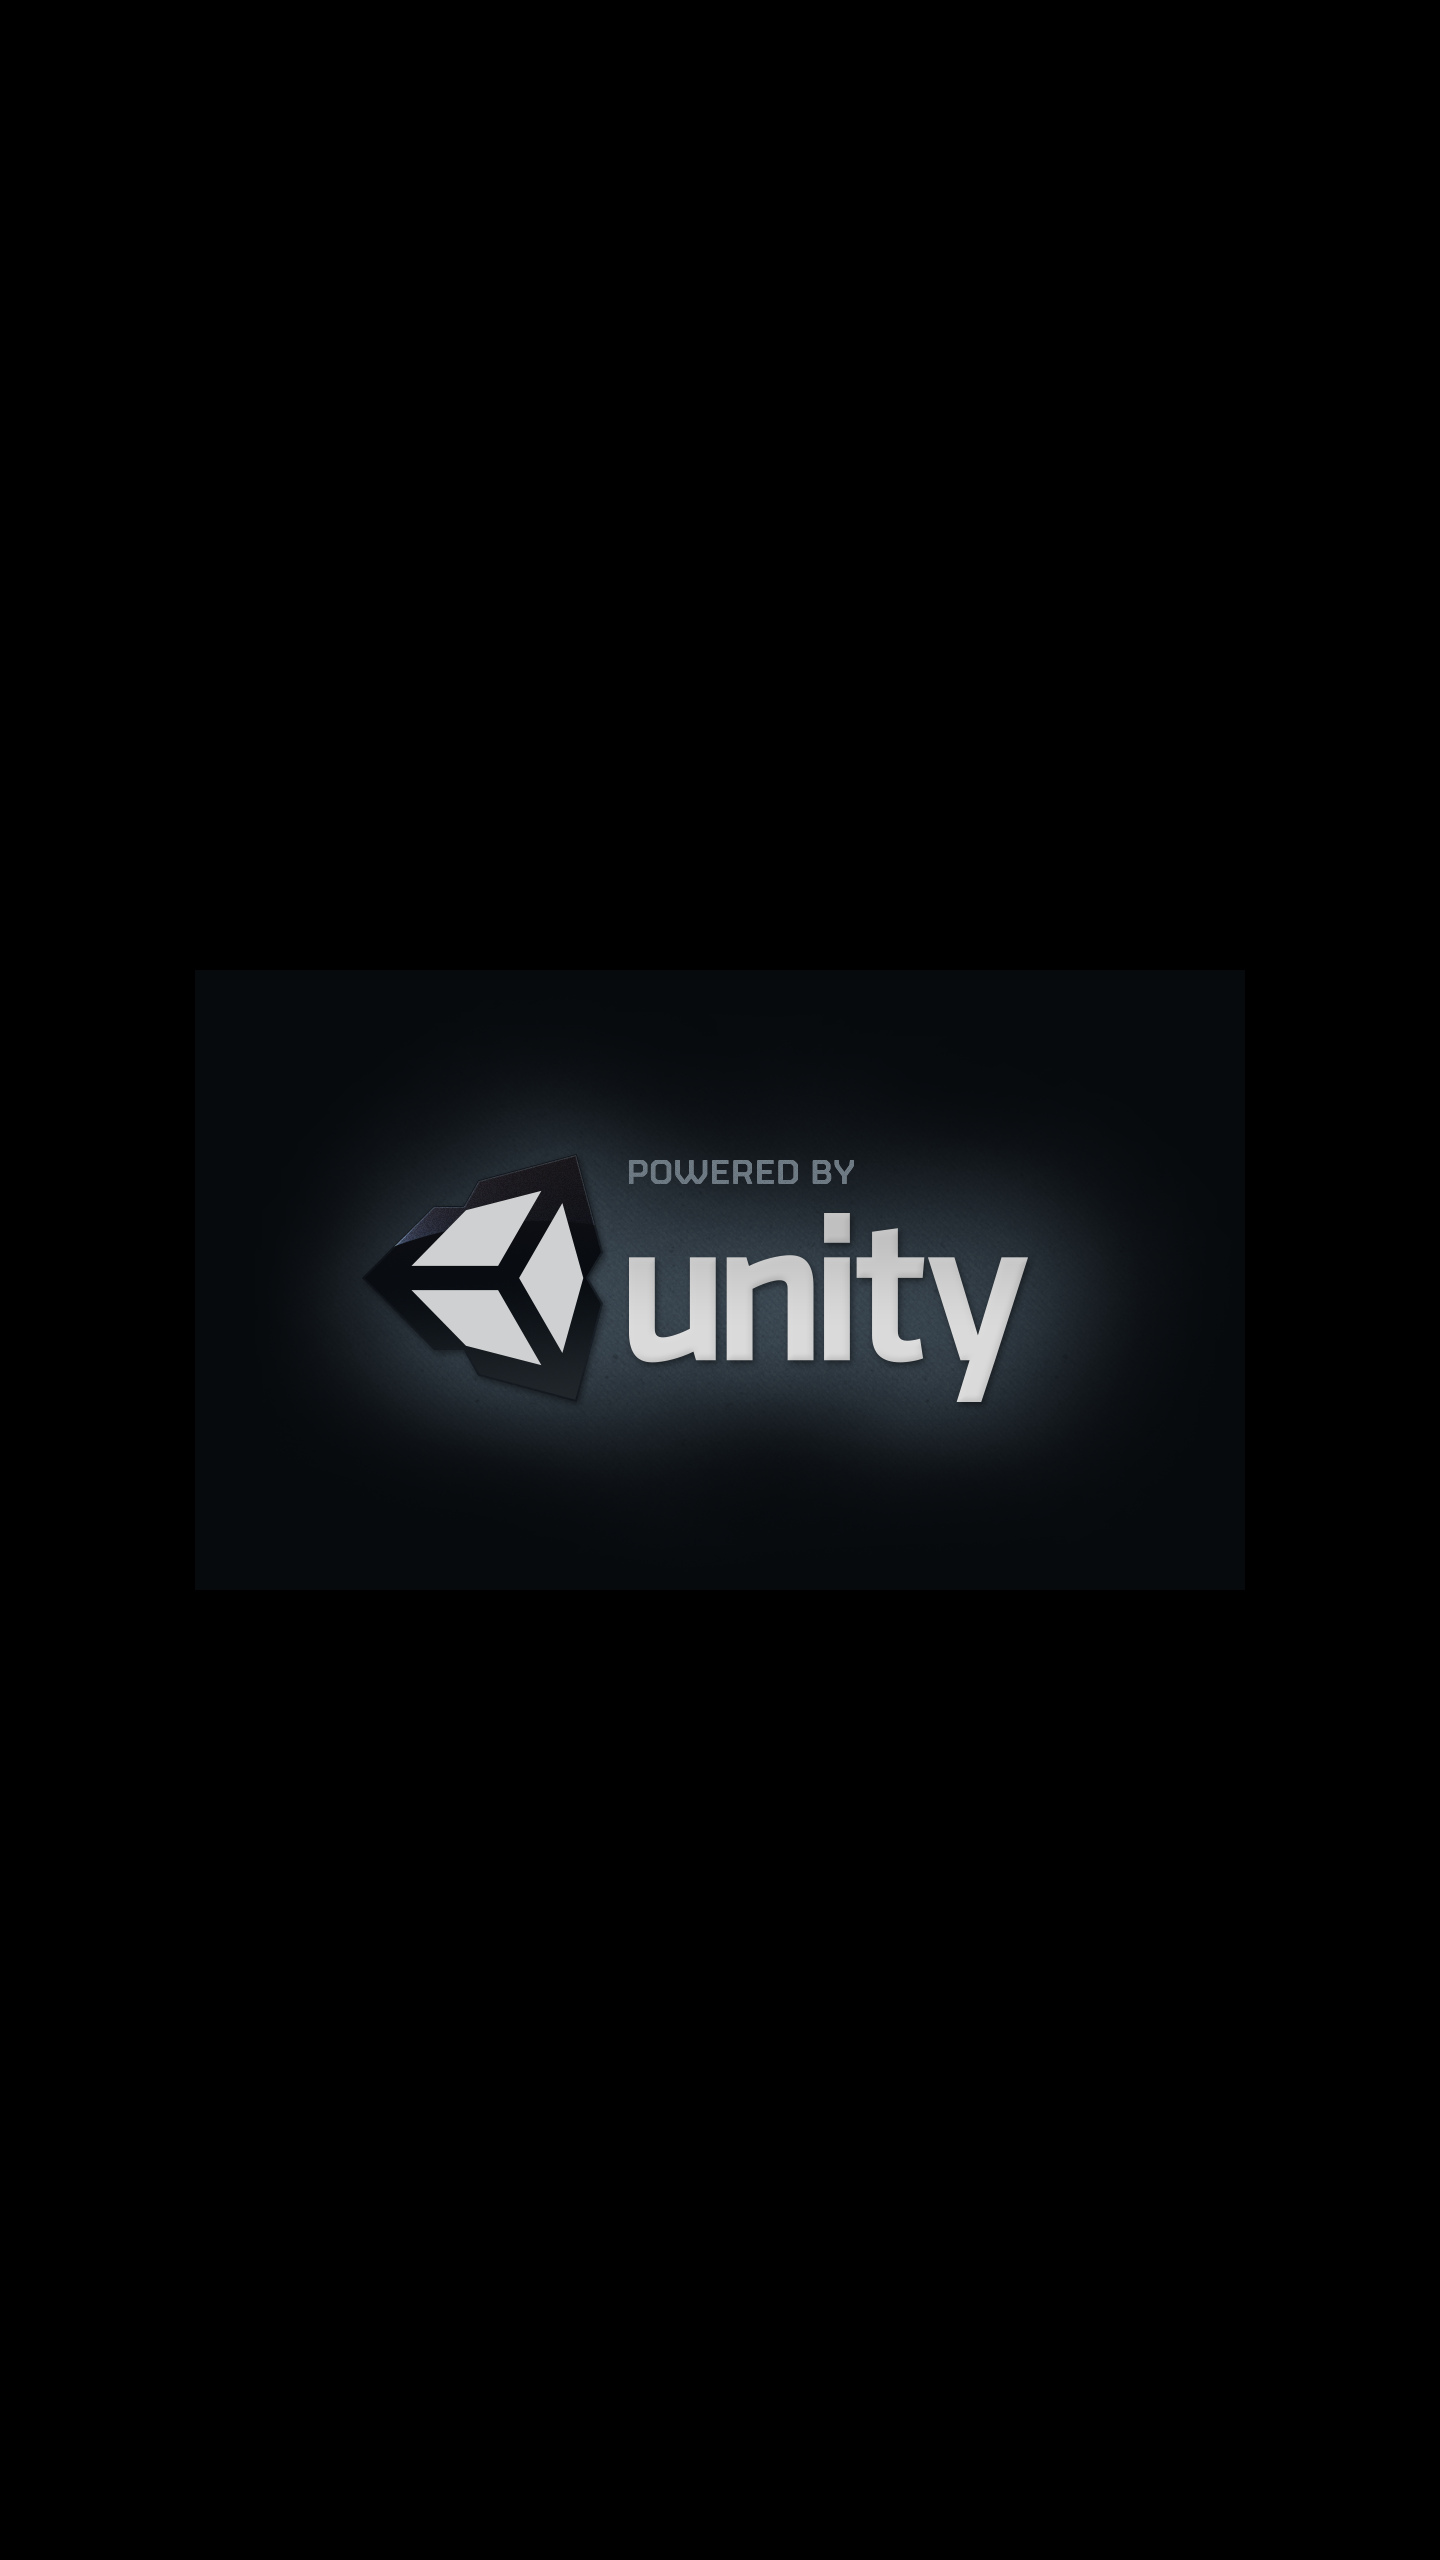 Why The Ugly Personal Edition Splash Screen Unity Forum